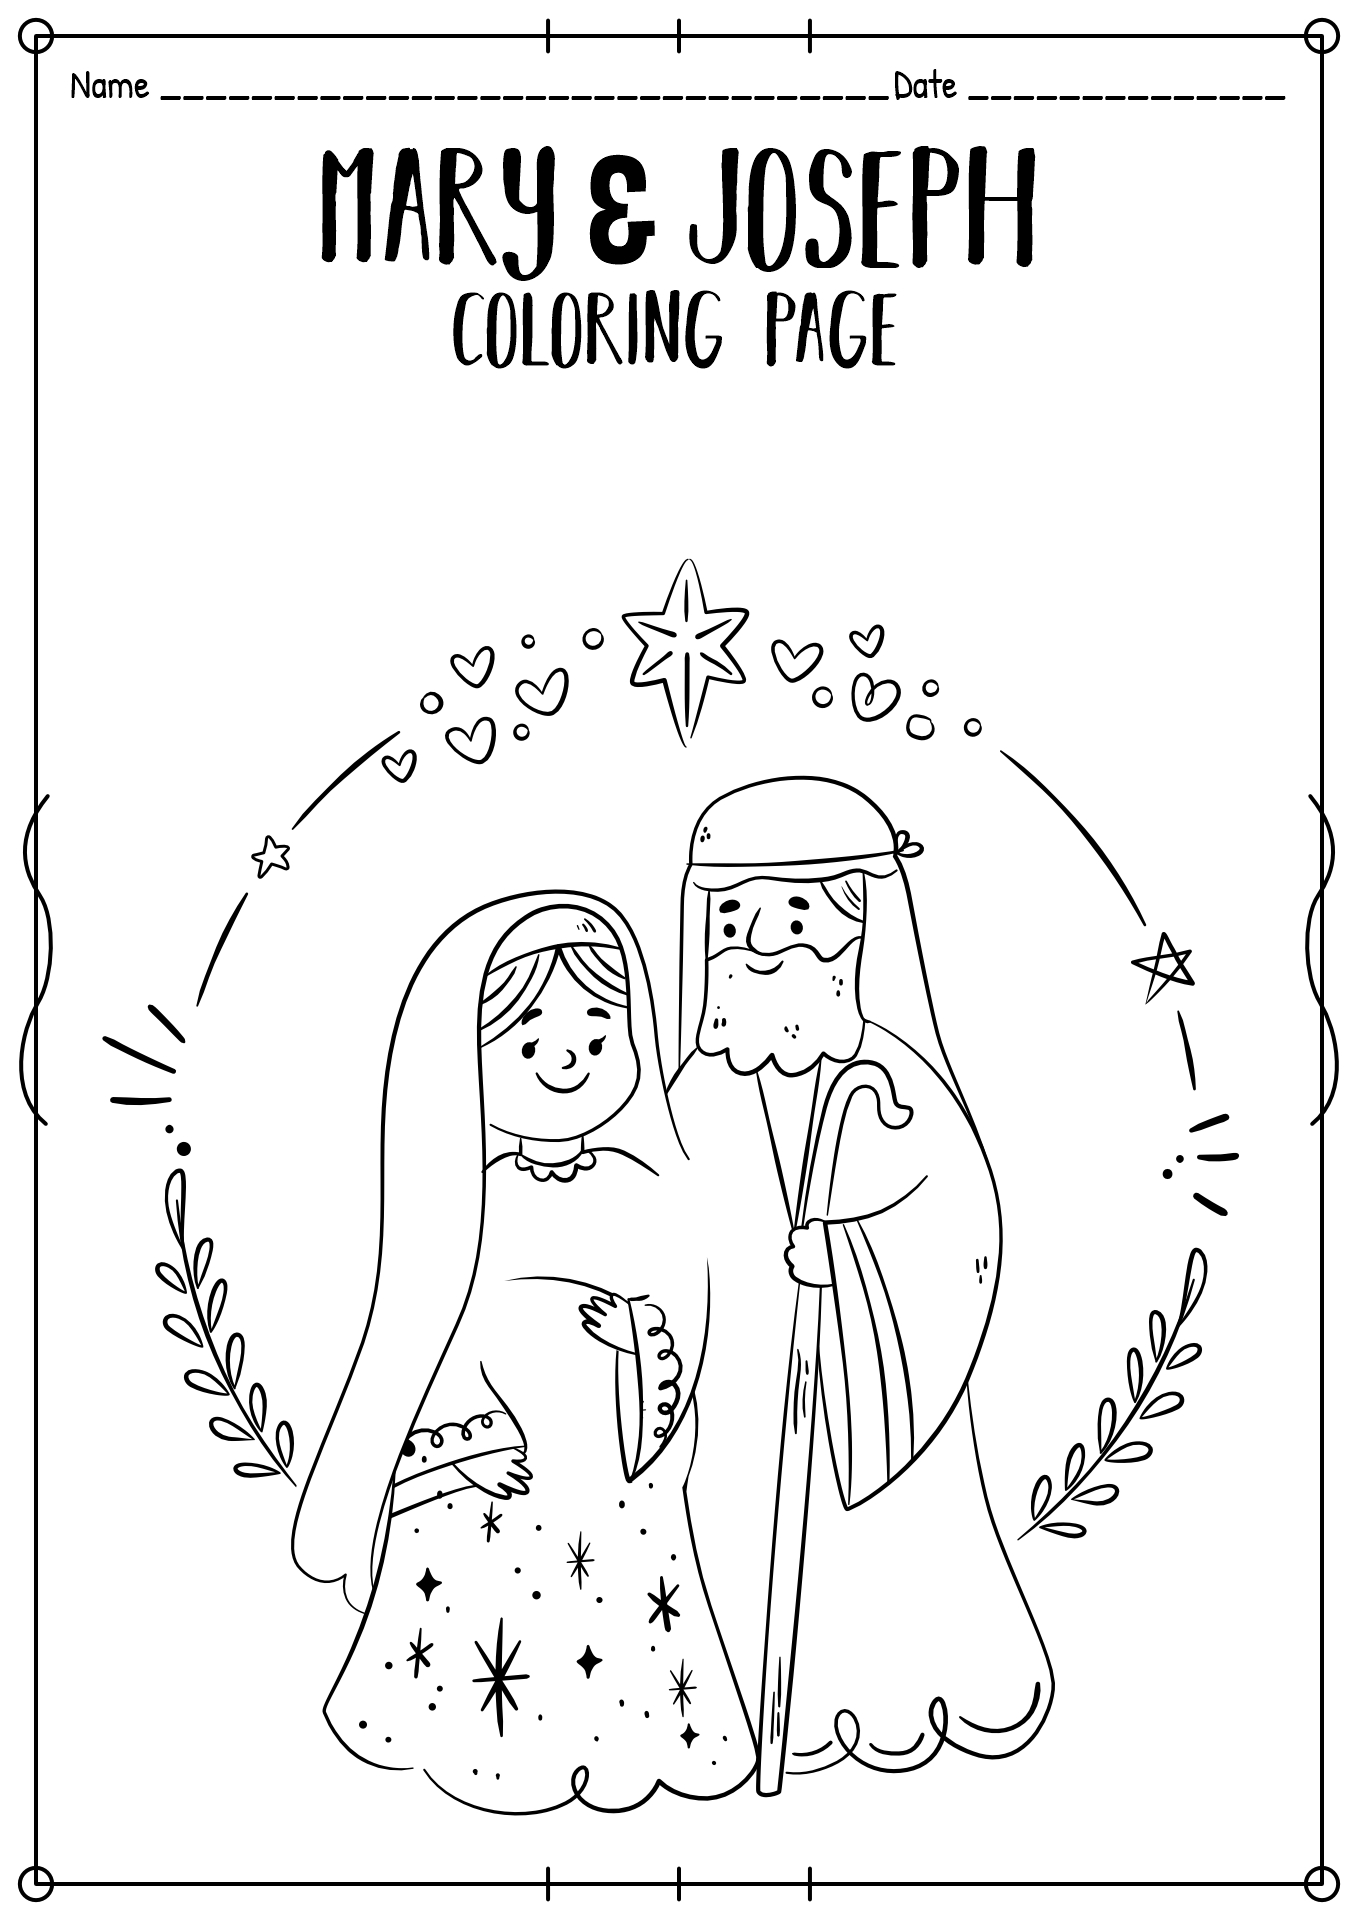 Mary and Joseph Journey to Bethlehem Coloring Page